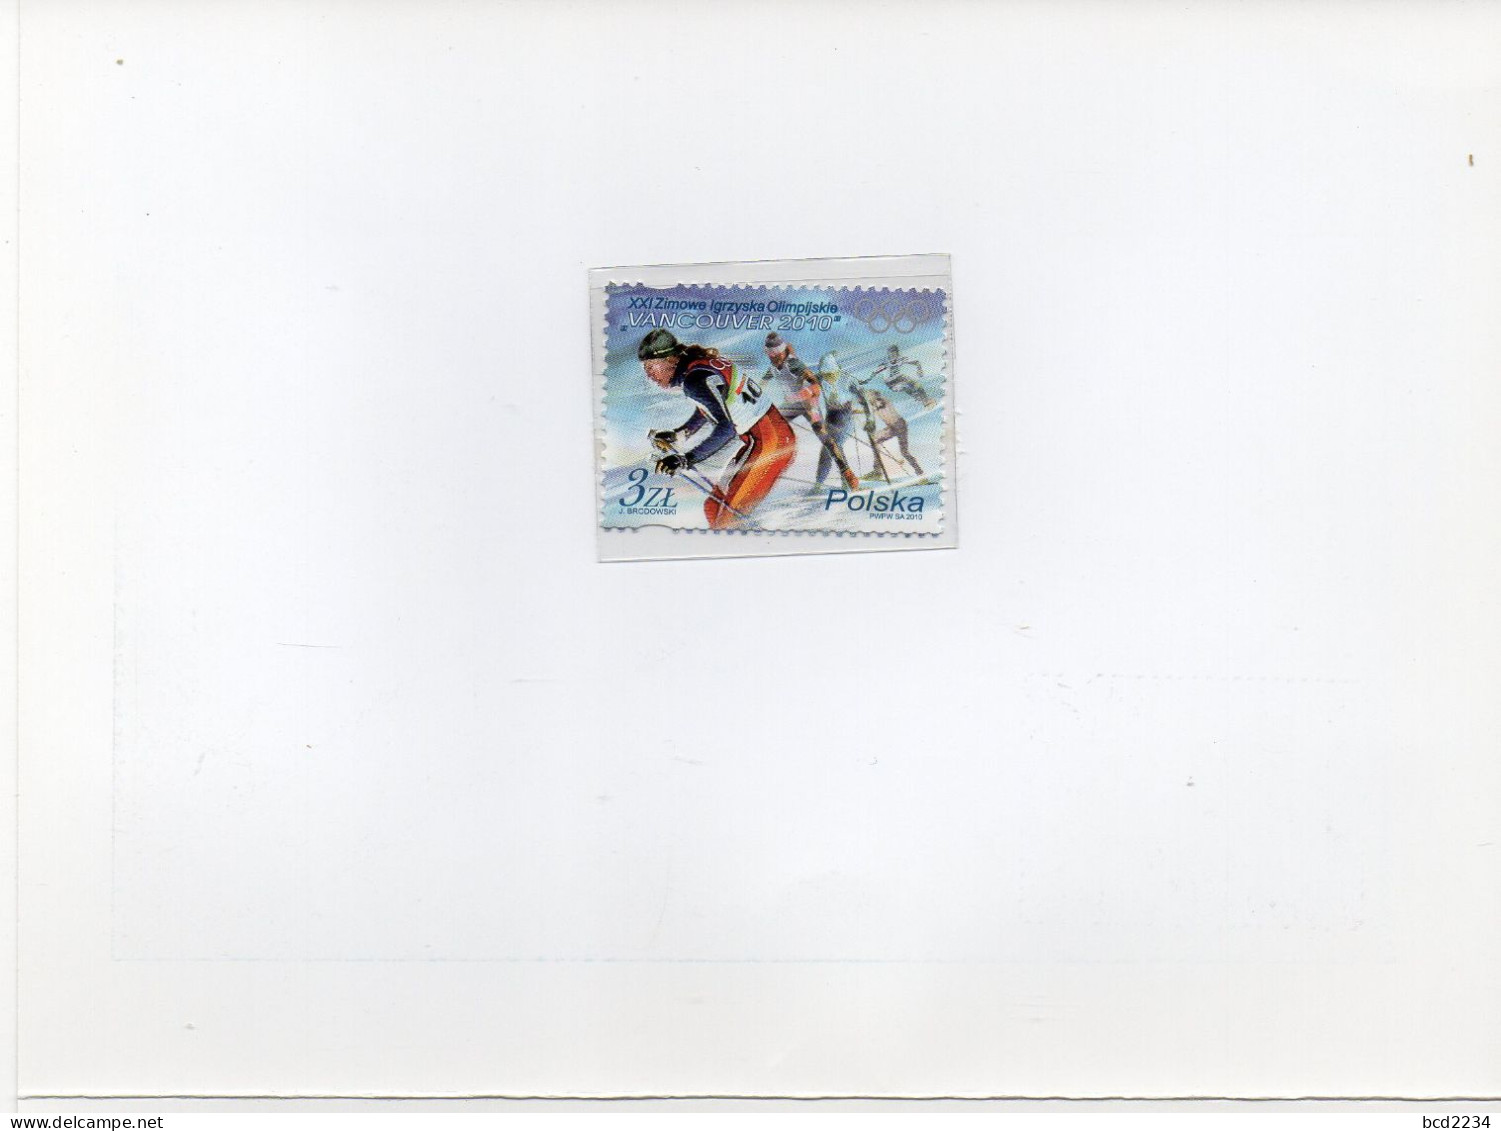 POLAND 2010 POLISH POST OFFICE SPECIAL LIMITED EDITION FOLDER: XXI OLYMPIC WINTER GAMES VANCOUVER CANADA OLYMPICS FDC - Covers & Documents